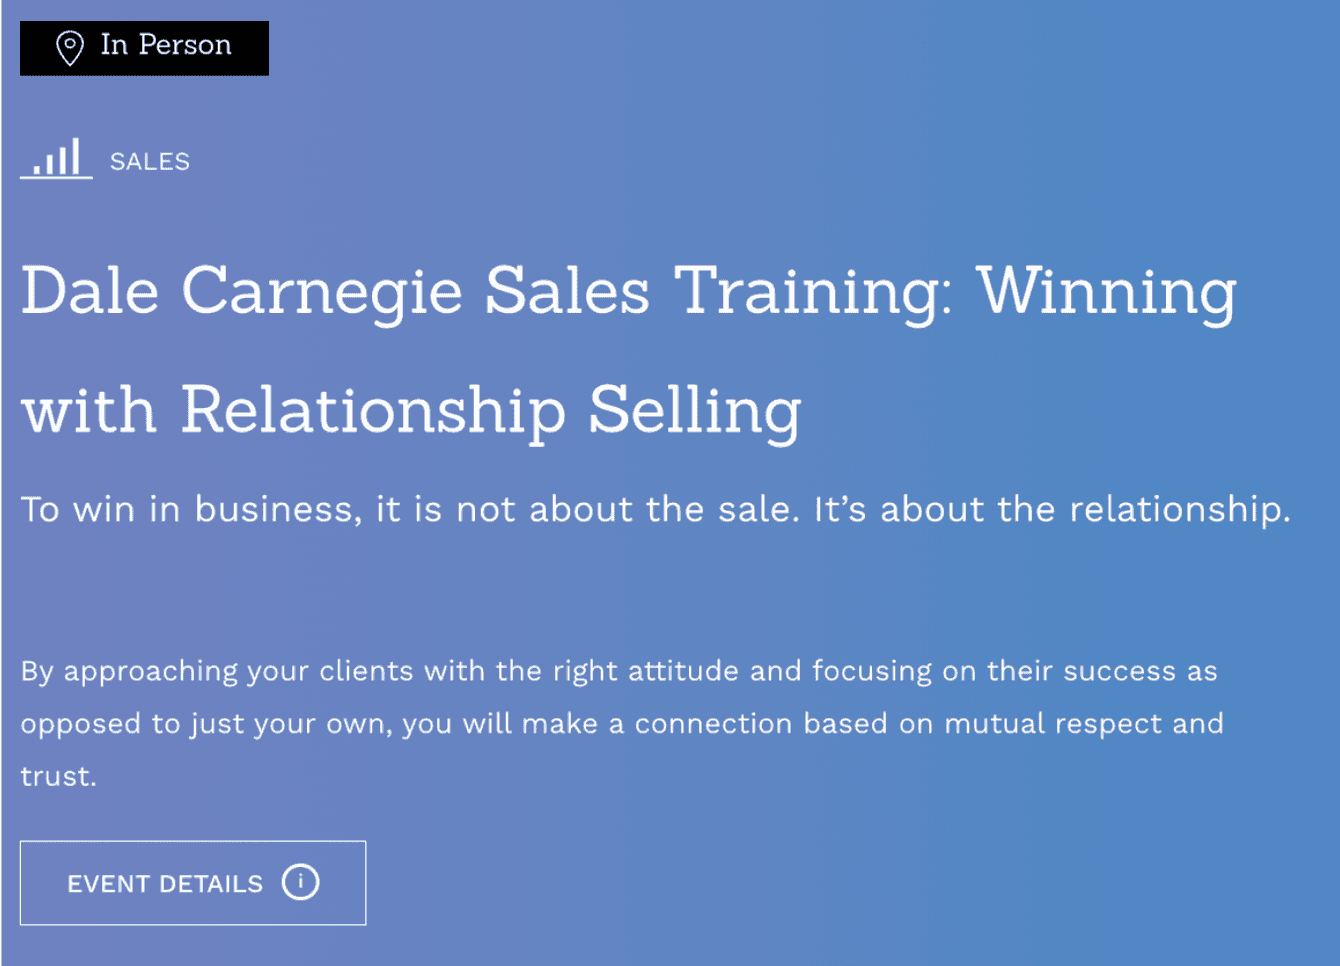 A screen grab of Dale Carnegie sales training